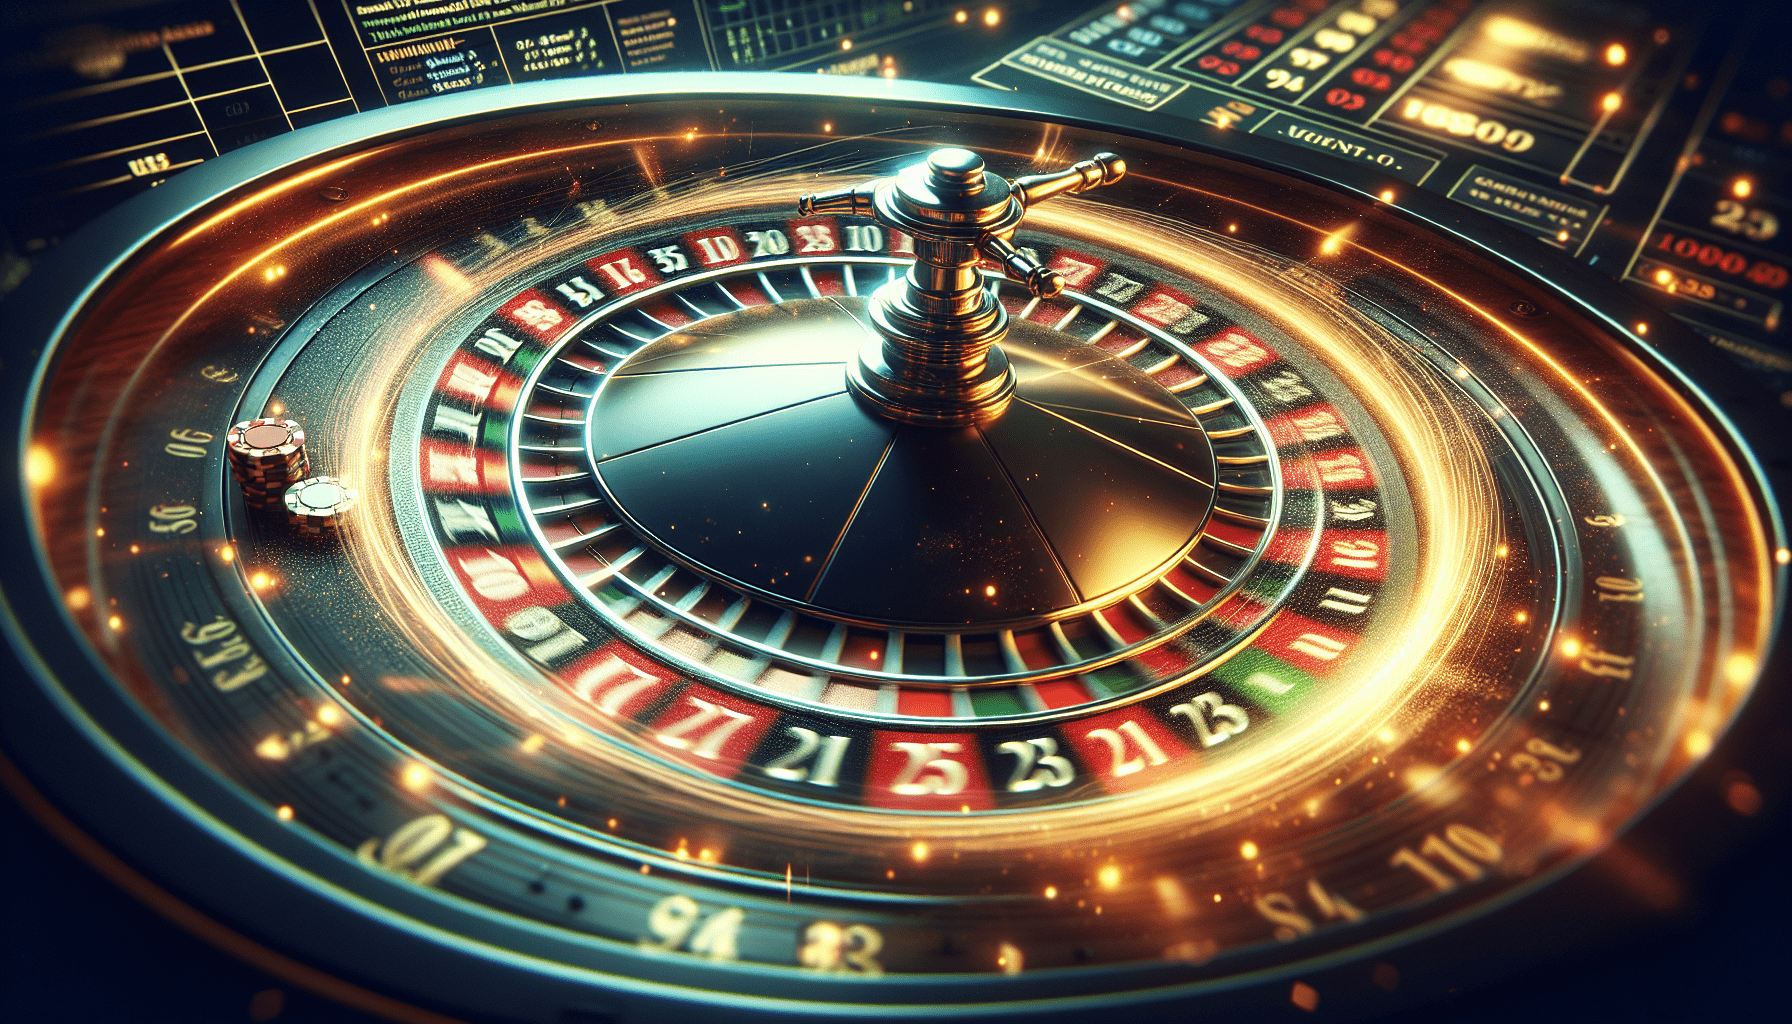 is online casino roulette fixed or completely random